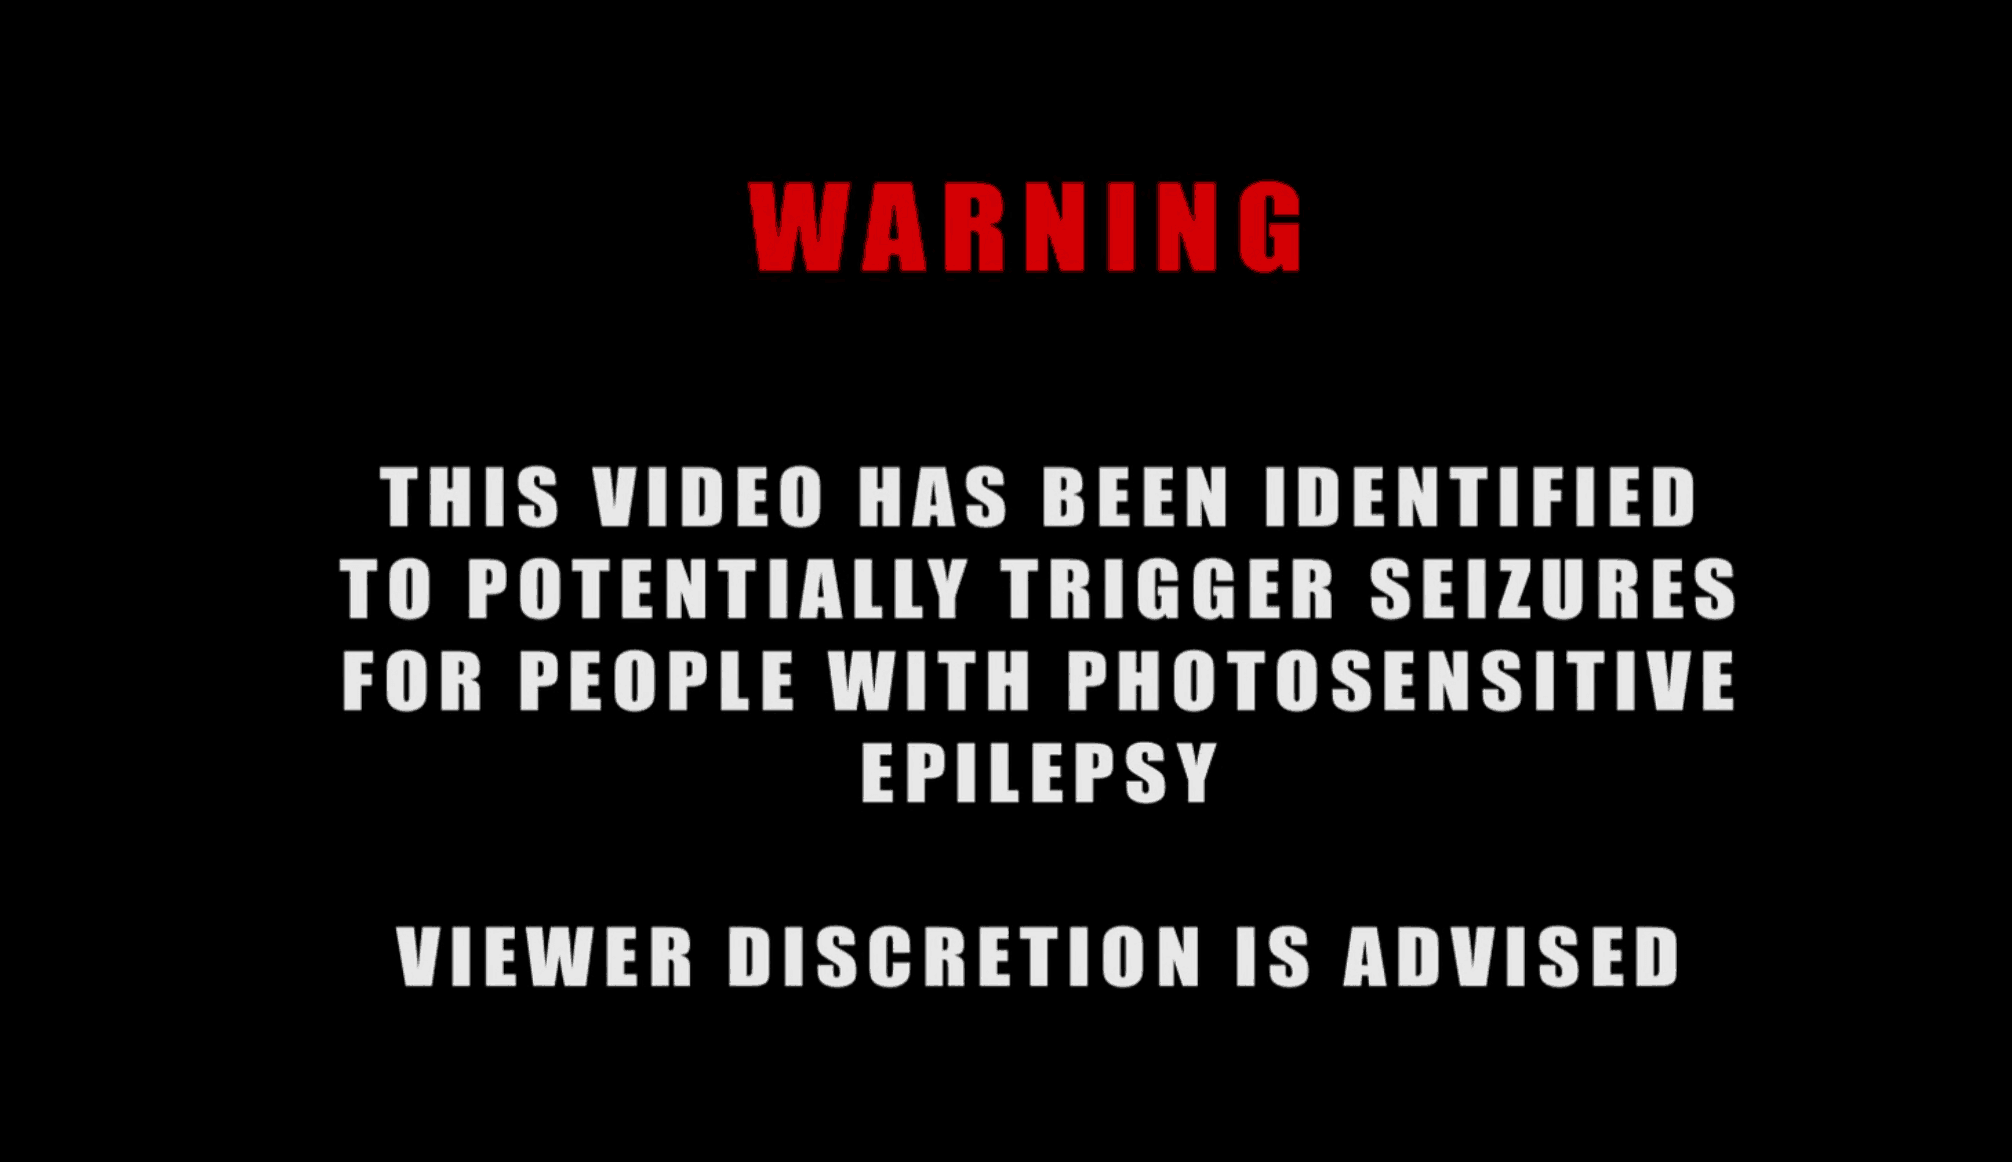 An epilepsy warning placed at the beginning of a video.